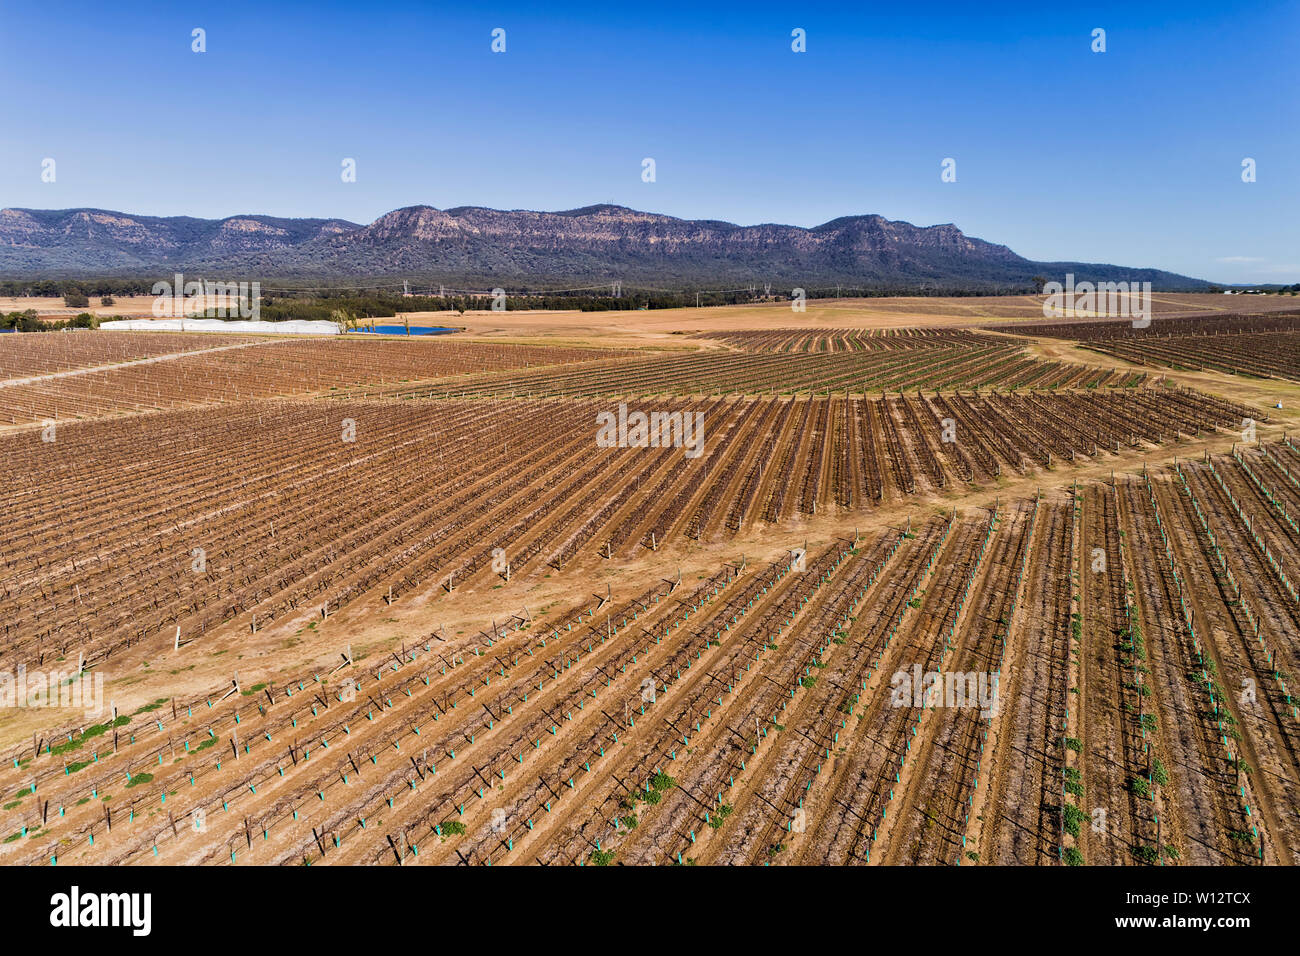 Agronomy and agriculture in action around Pokolbin vineyards of Hunter Valley wine making region in Australia. Aerial elevated view over rows of growi Stock Photo